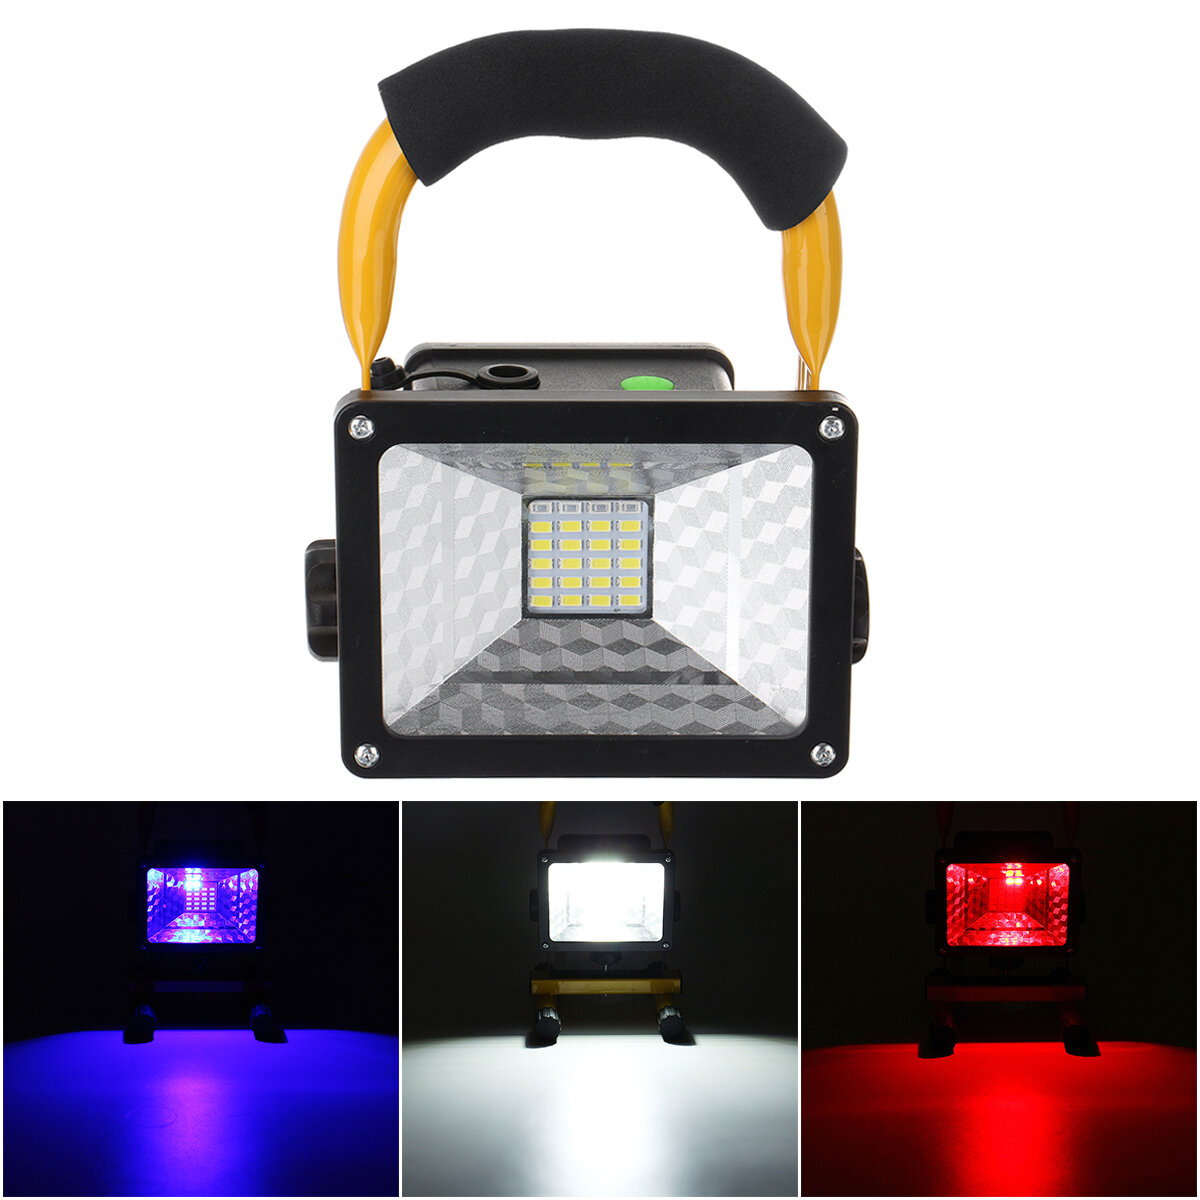 60W LED Flood Light Rechargeable Camping Light Portable Work Light For Outdoor Camping Hiking Fishin